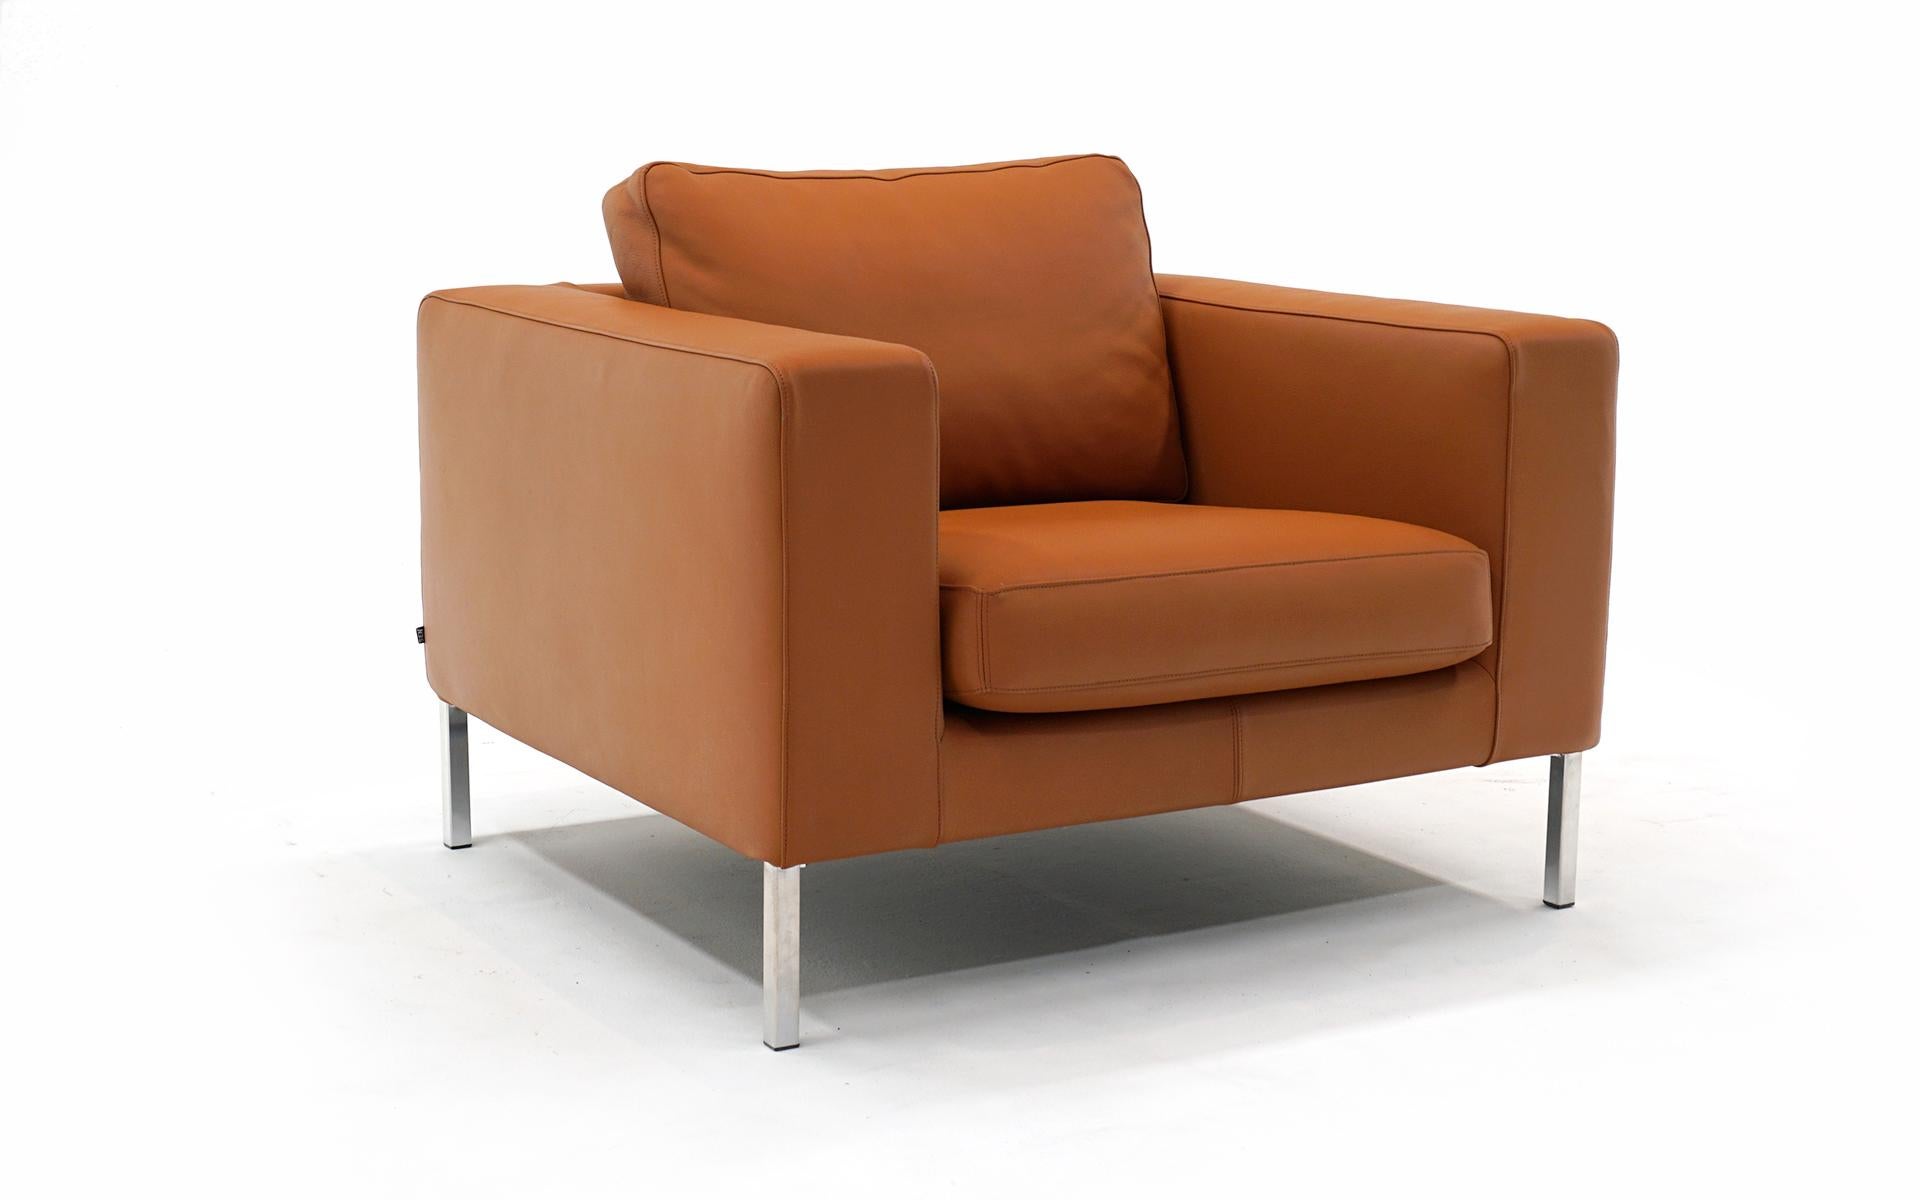 Neo Lounge chair designed by Niels Bendtsen for Bensen, Italy. This example is only a few years old and has seen very little use. Cognac / muted orange leather and chromed steel legs. Signed in the decking as well as labeled. No tears, scuffs,